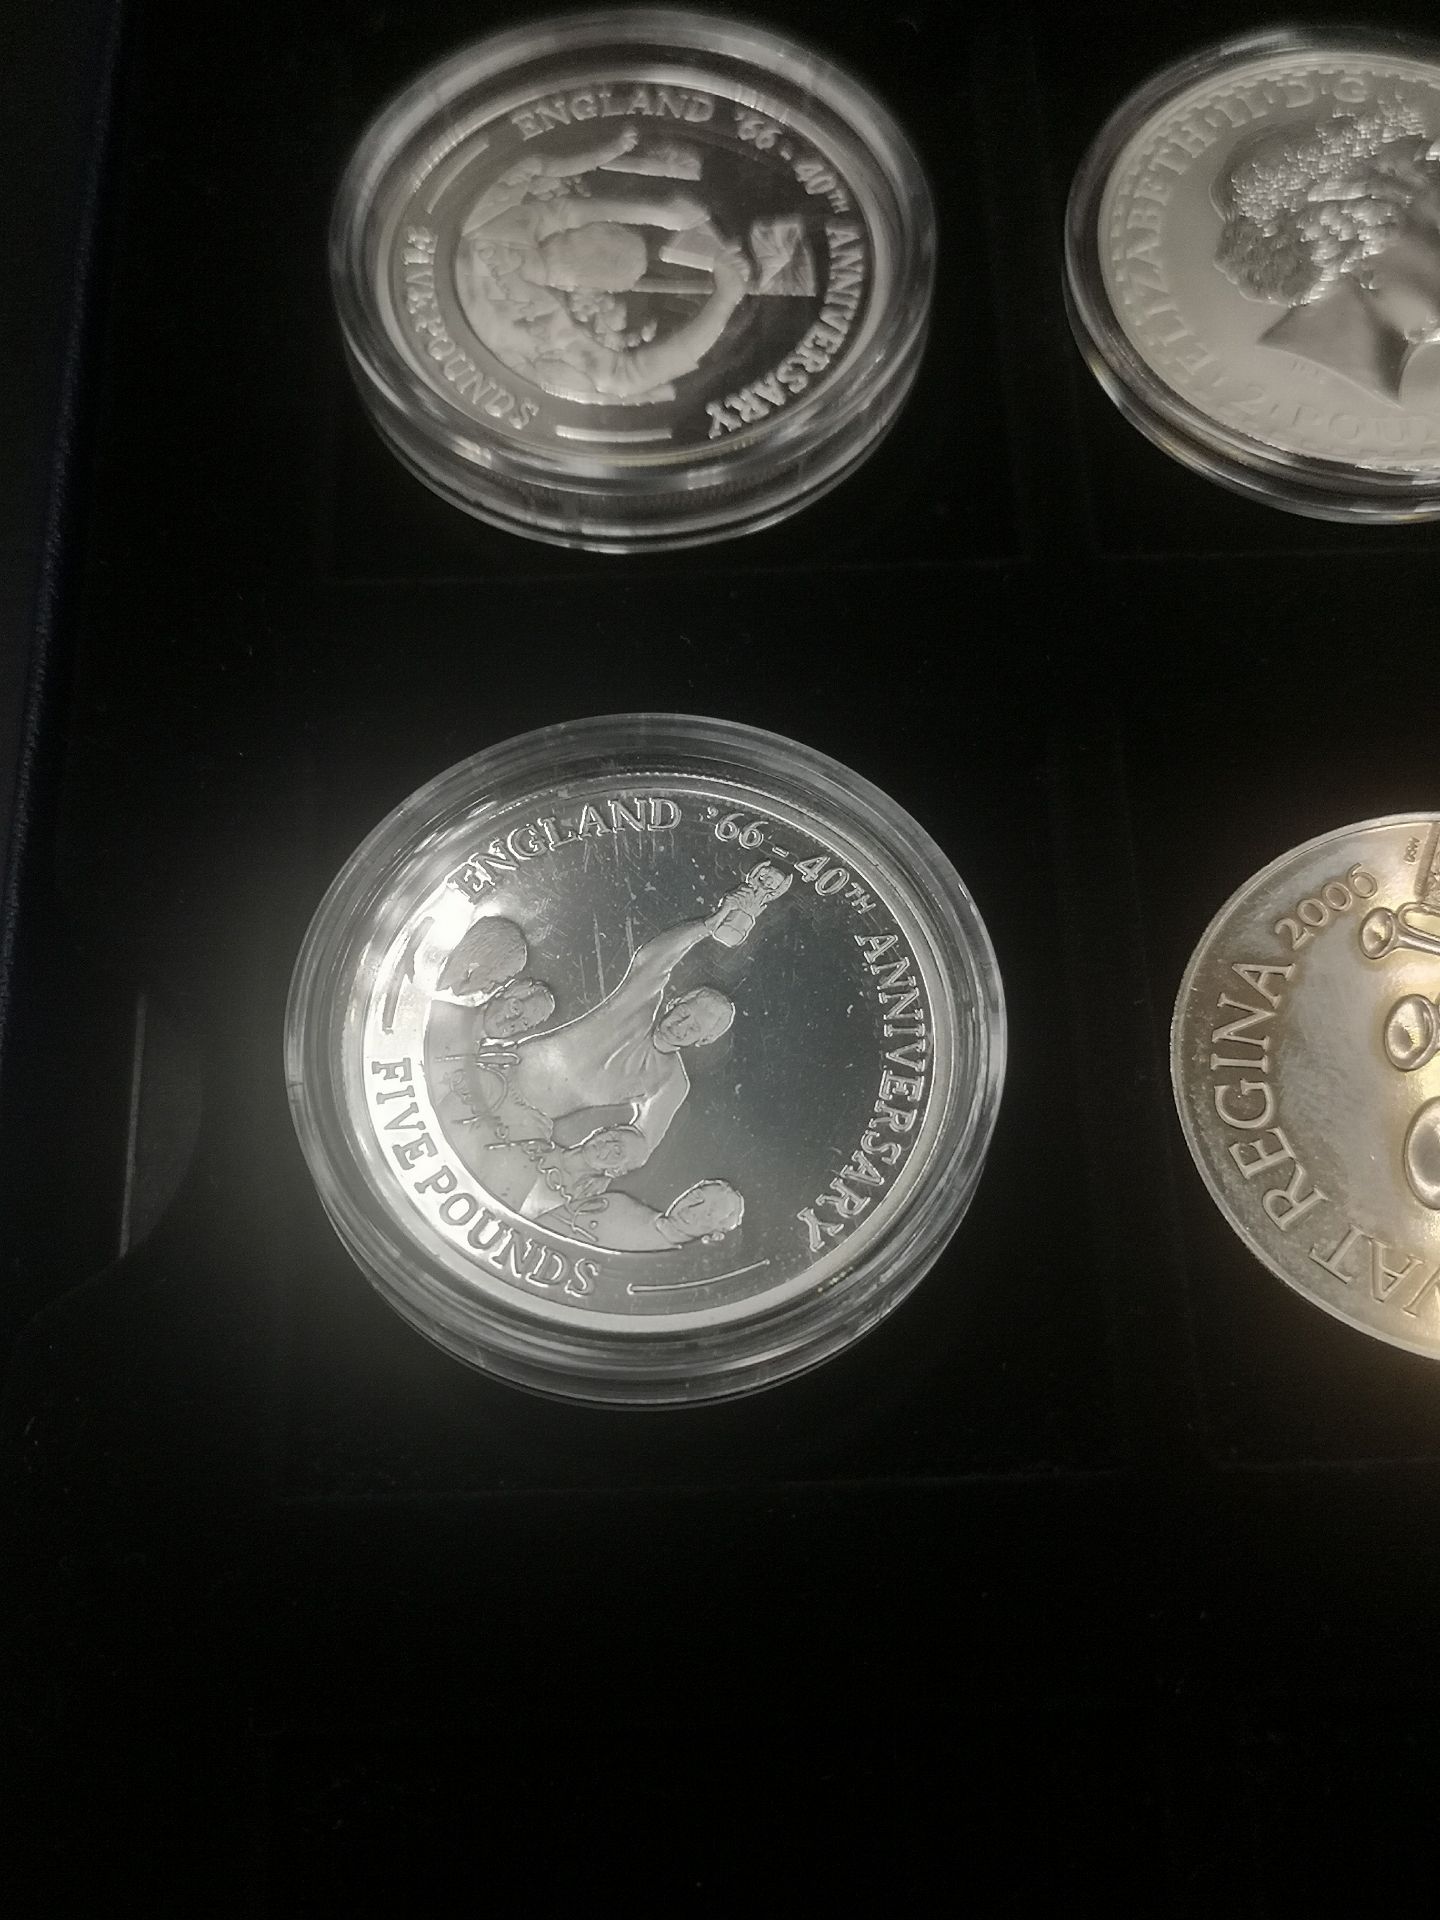 Siz silver proof £5 coins together with two silver 10 franc coins - Image 2 of 9